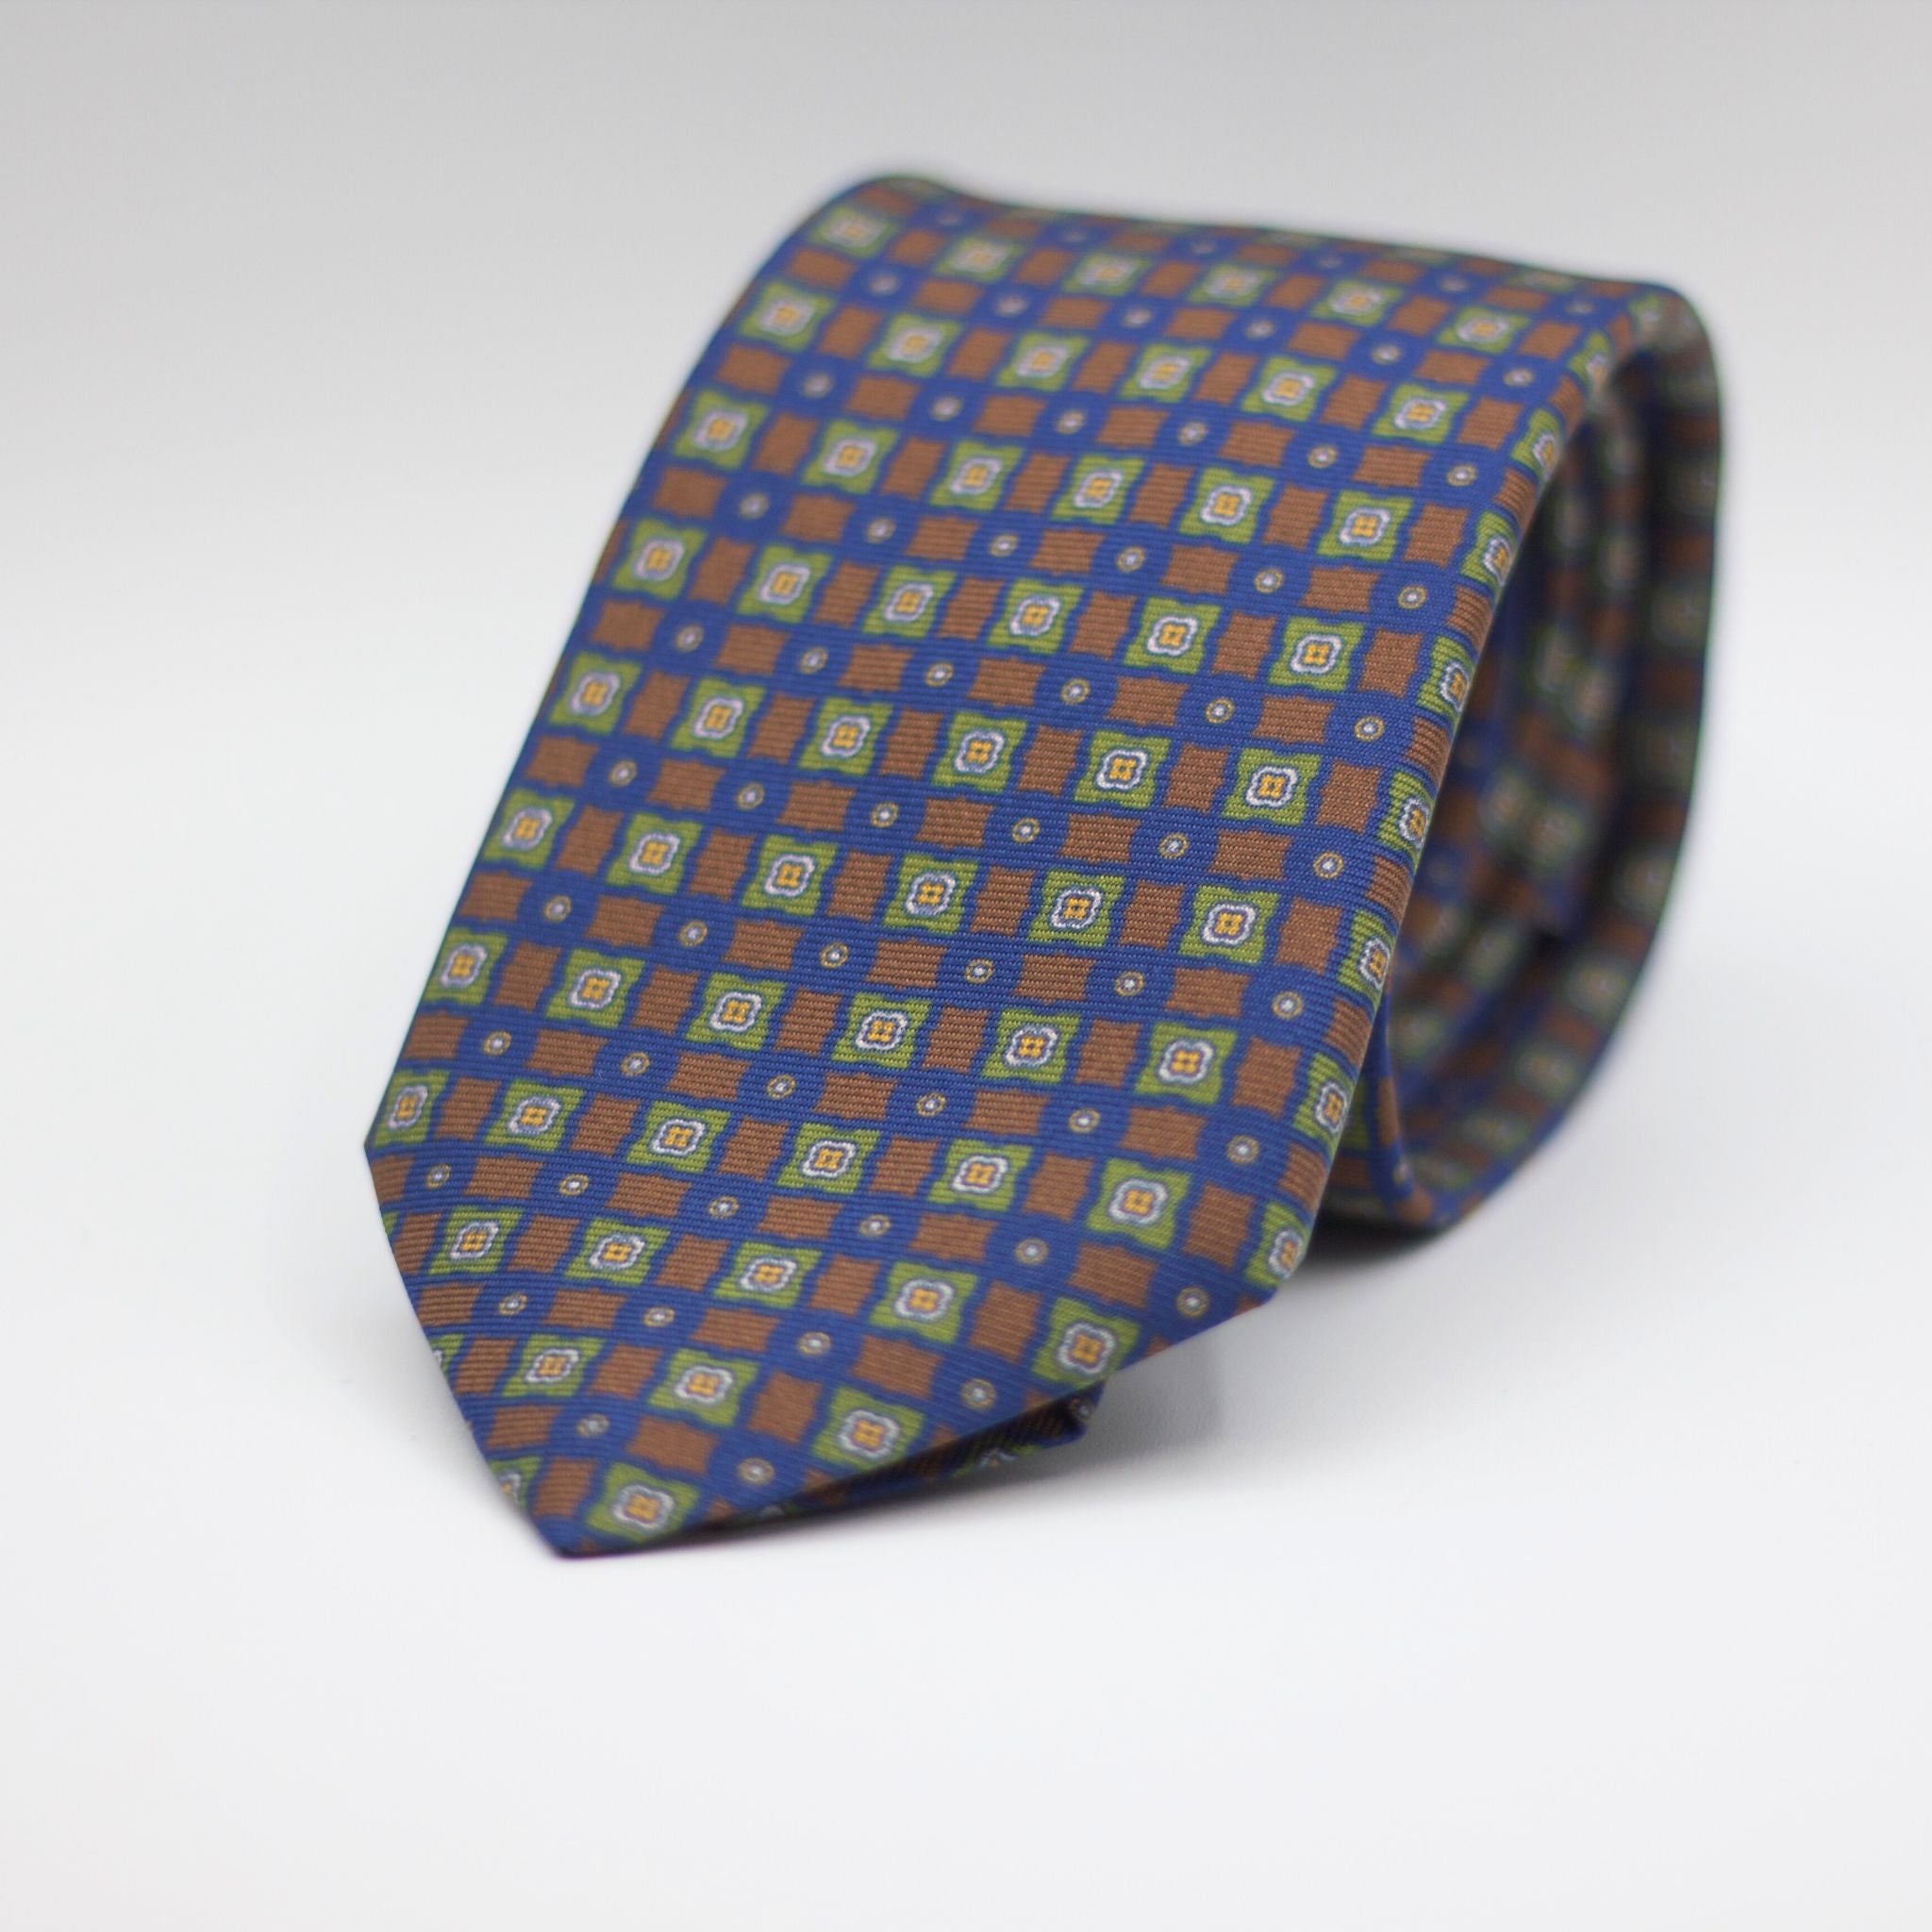 Cruciani & Bella 100% Silk Printed Self-Tipped Blue, Brown, Green, White and Yellow  Motif Tie Handmade in Rome, Italy. 8 cm x 150 cm